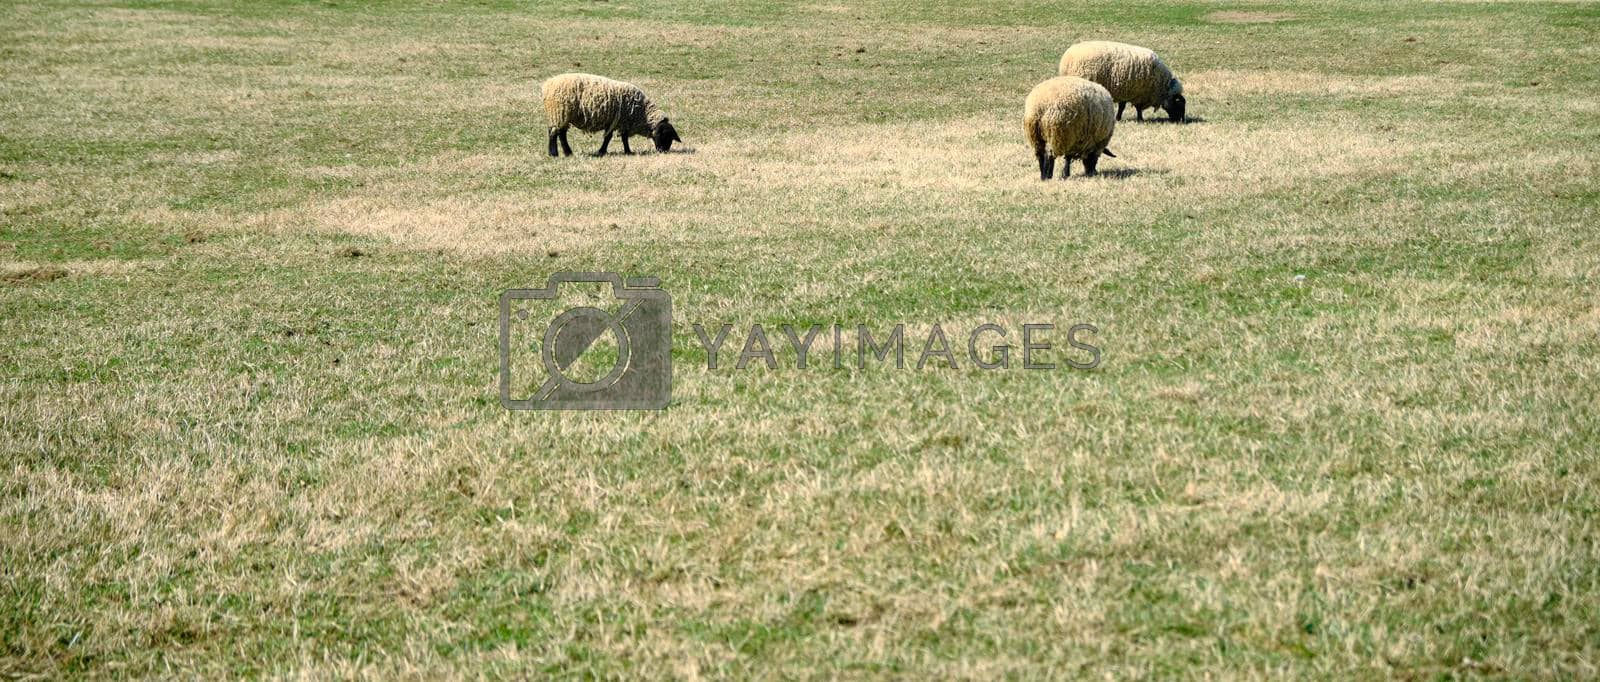 Royalty free image of sheep animals browse grass - The Tyrolean Rock Sheep. by Sandronize